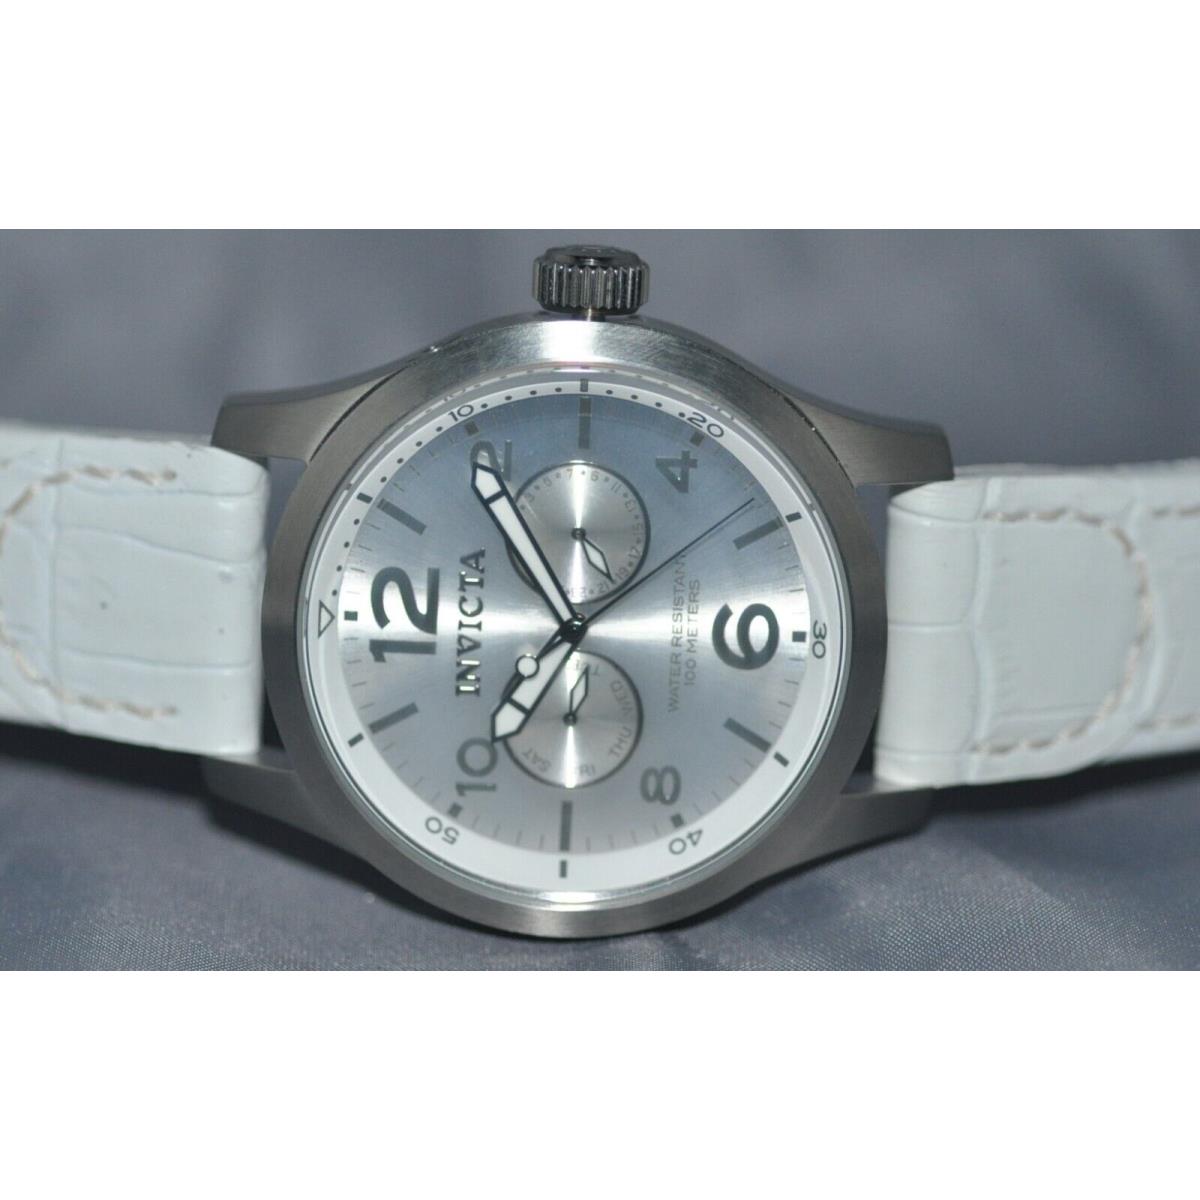 Invicta watch Specialty - Silver Dial, White Band, Silver Bezel